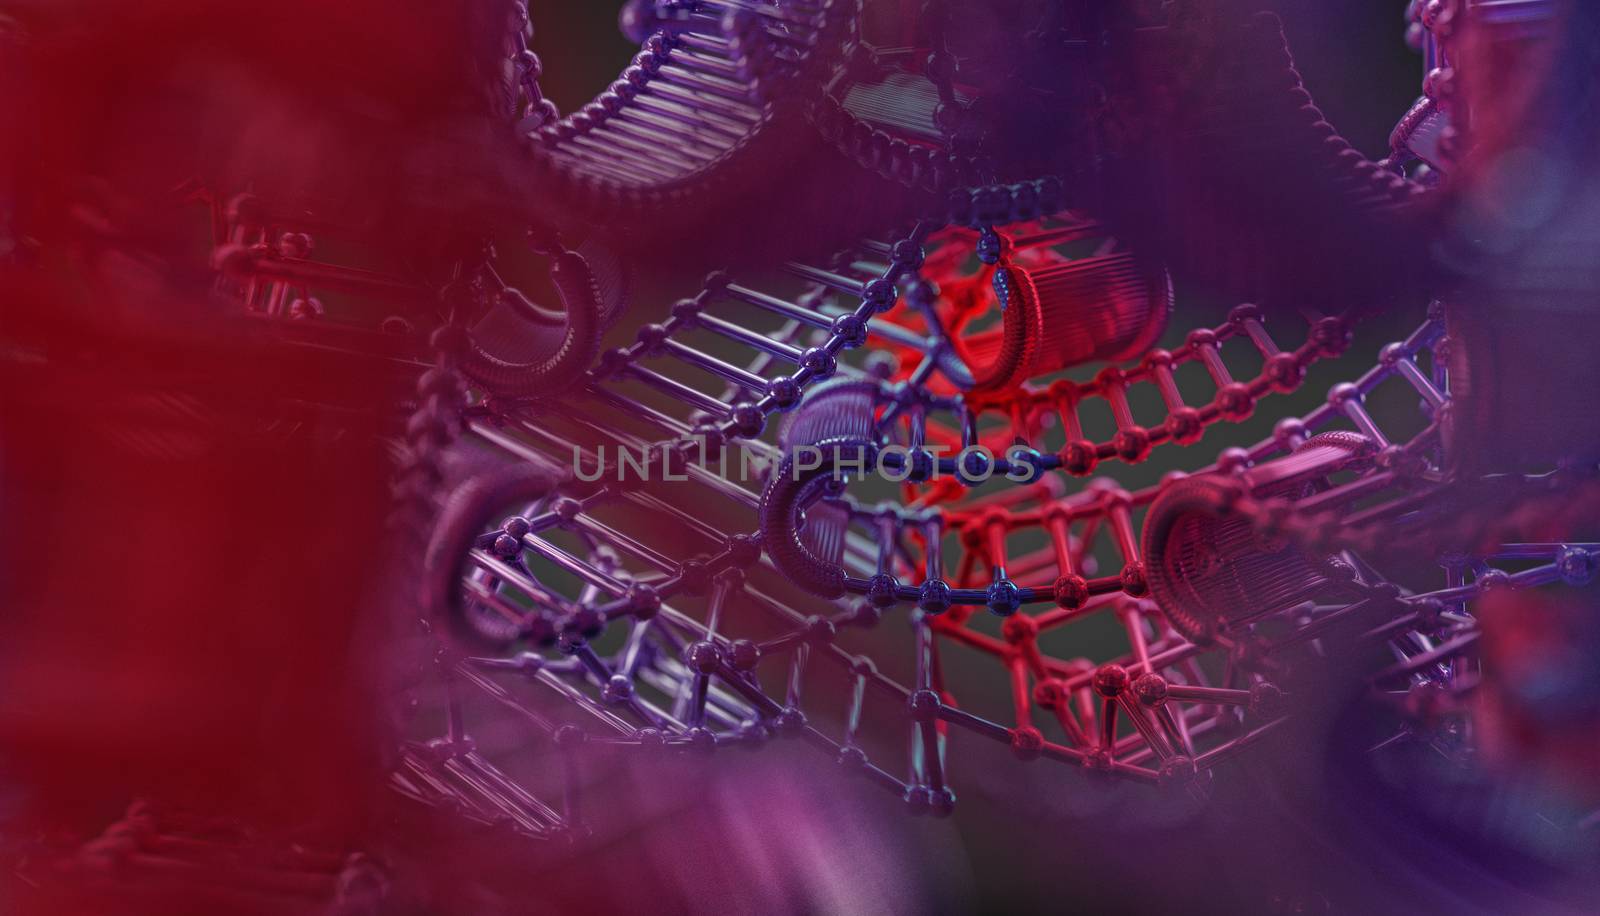 blurred image concept of biochemistry with dna molecule. Abstract background with molecules spheres reflective surface. DNA, Molecule, Chemistry